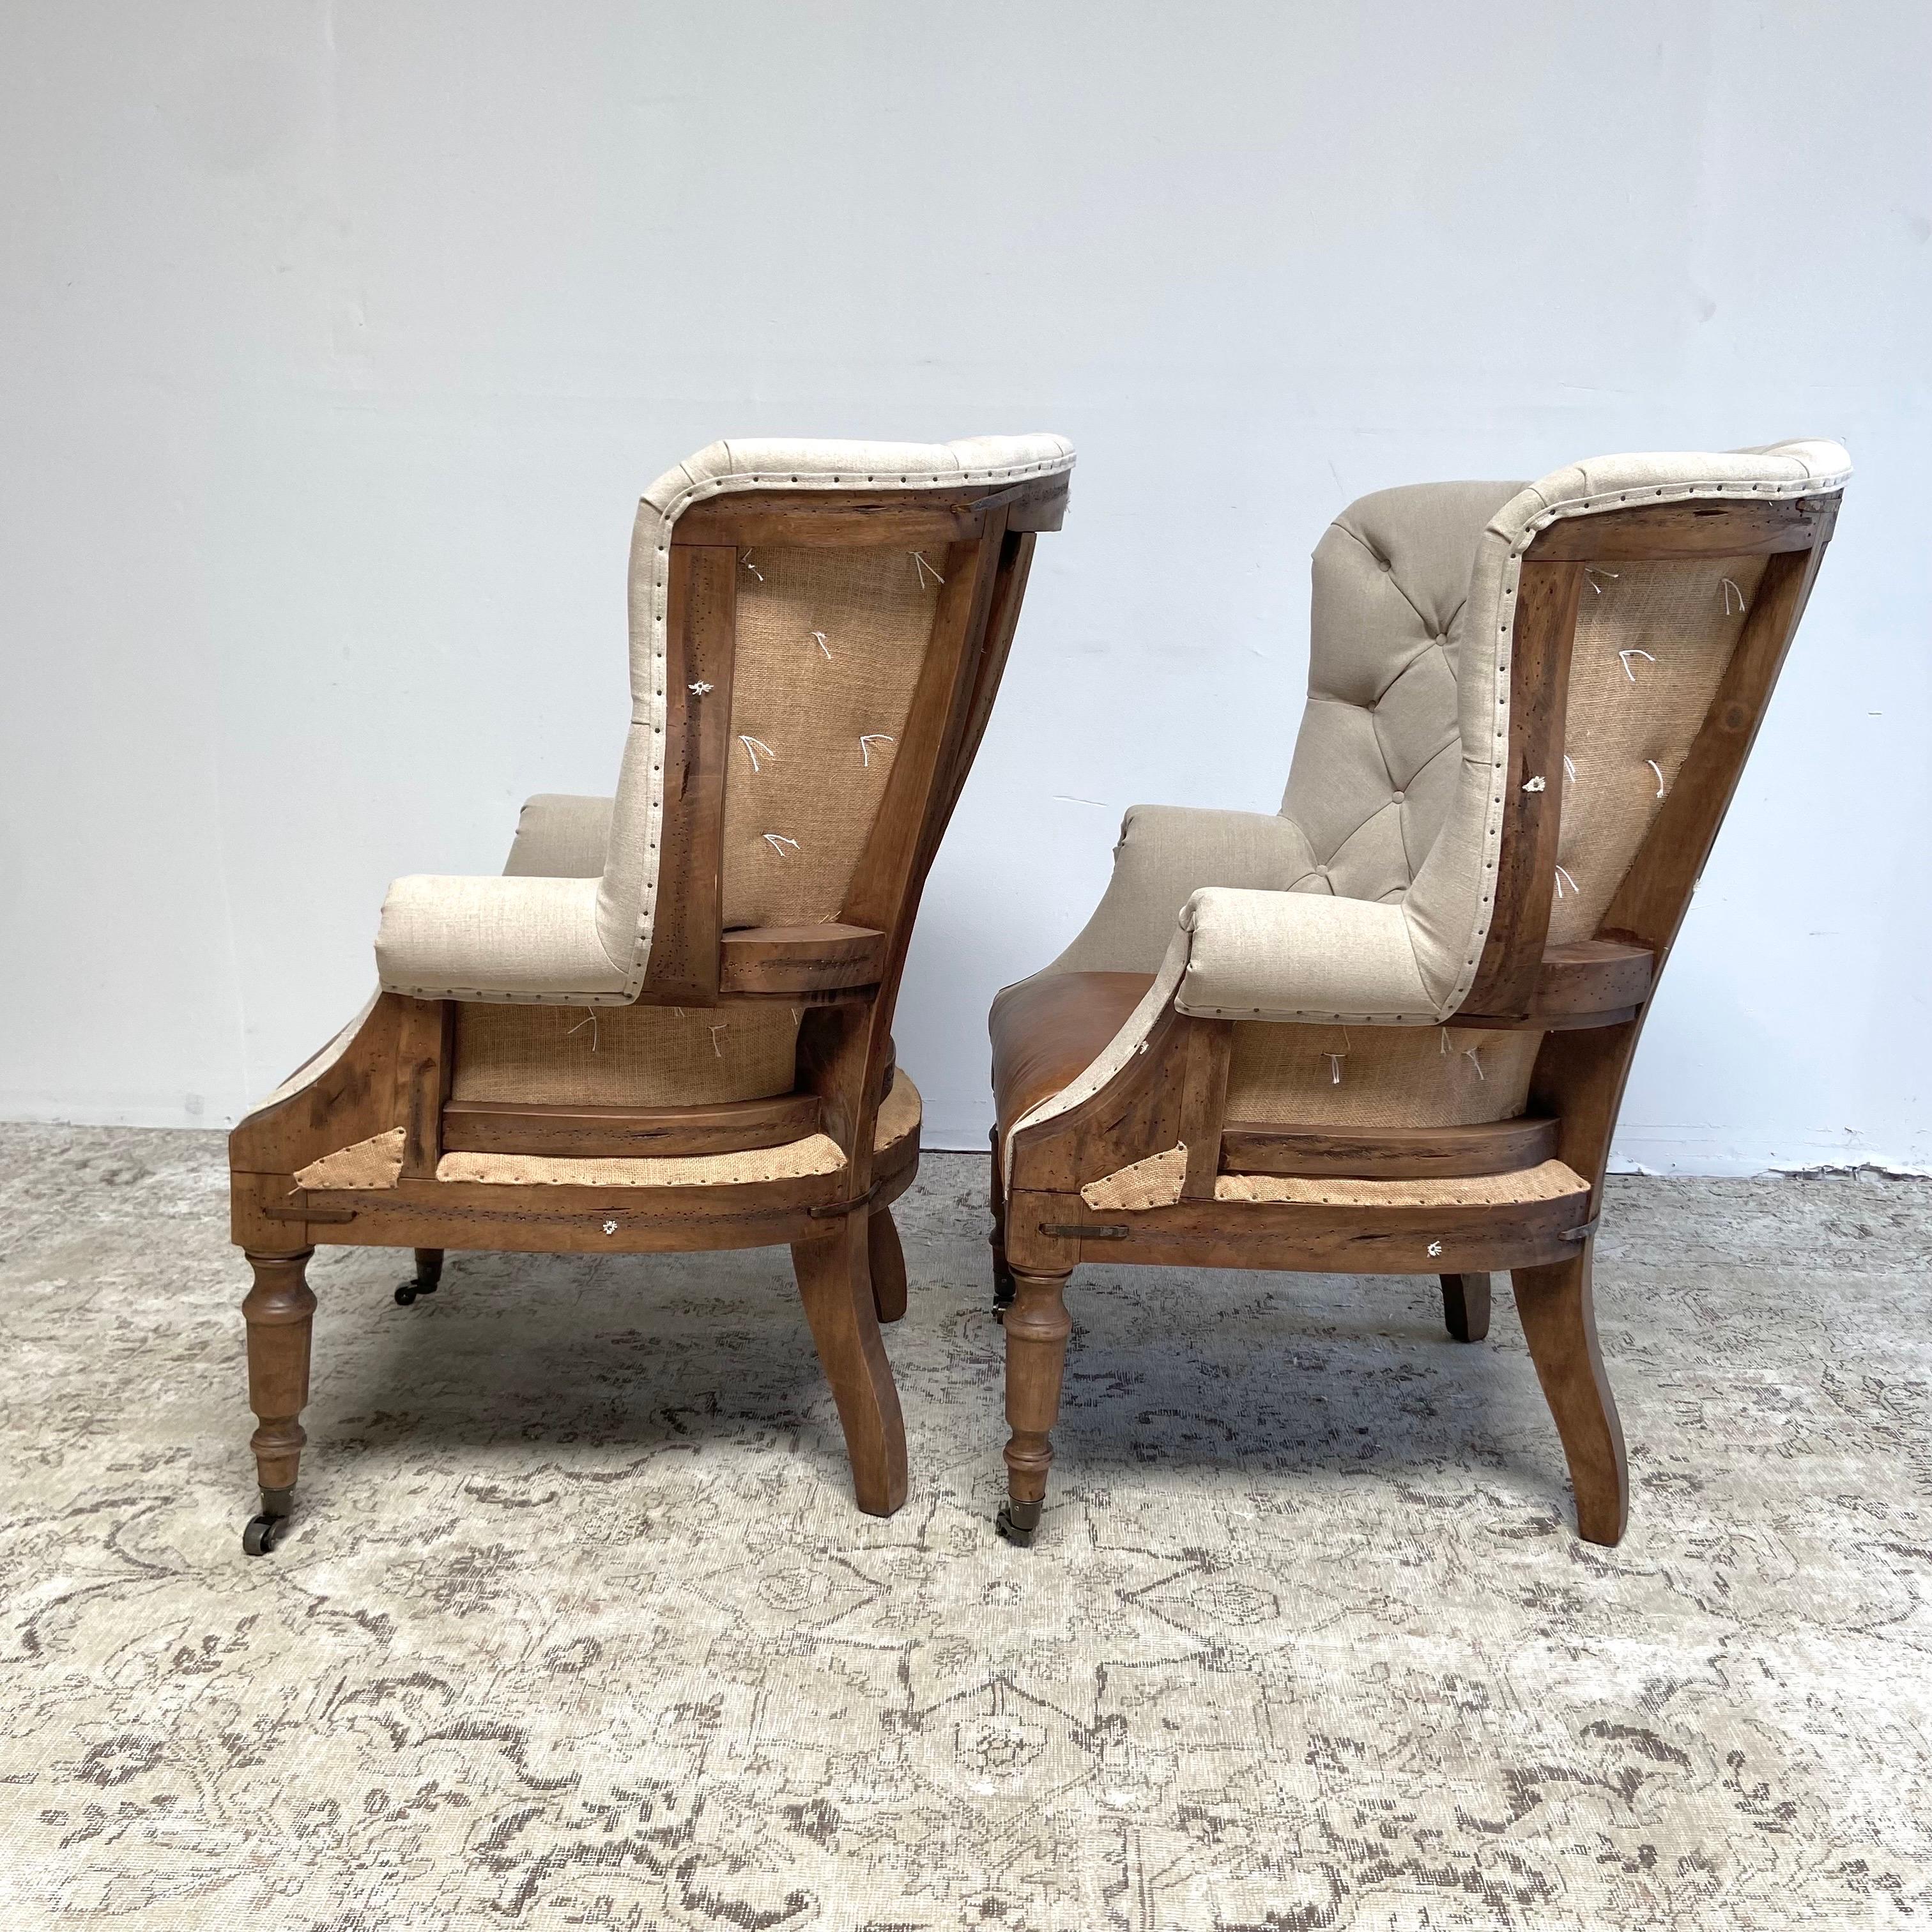 deconstructed wing chair